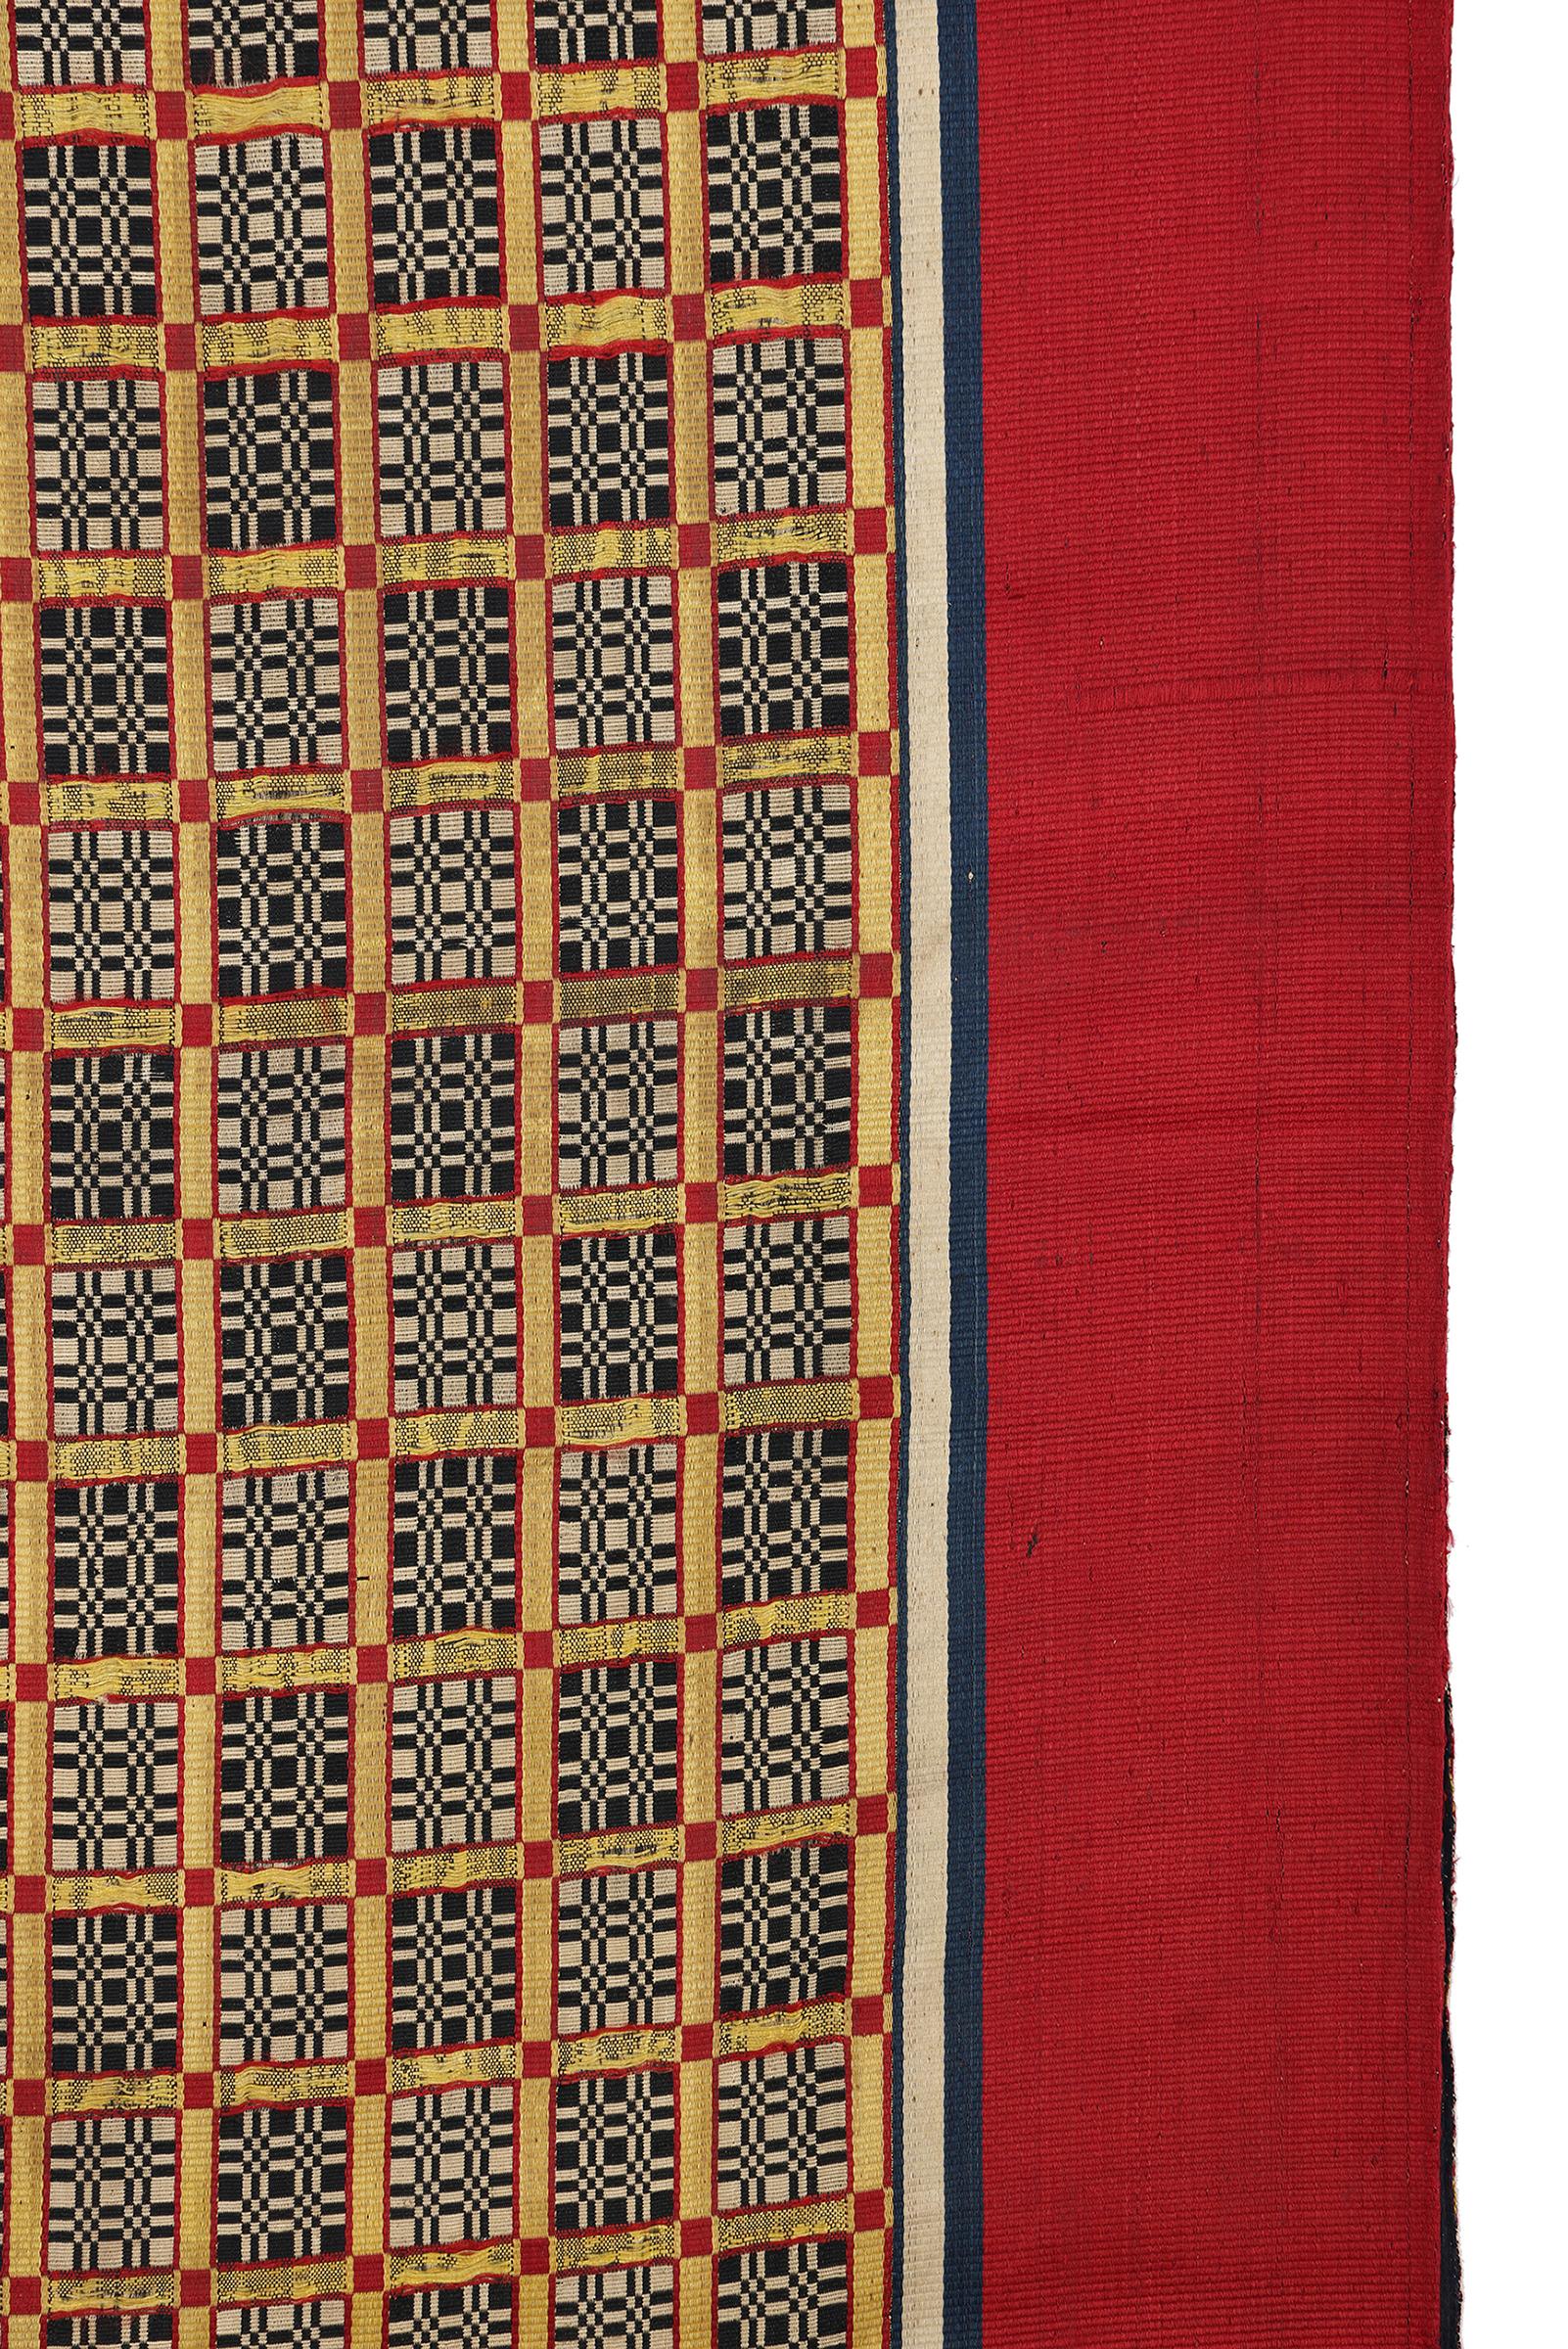 Islamic Antique Silk Woven Curtain or Hanging, Tetouan, Morocco For Sale